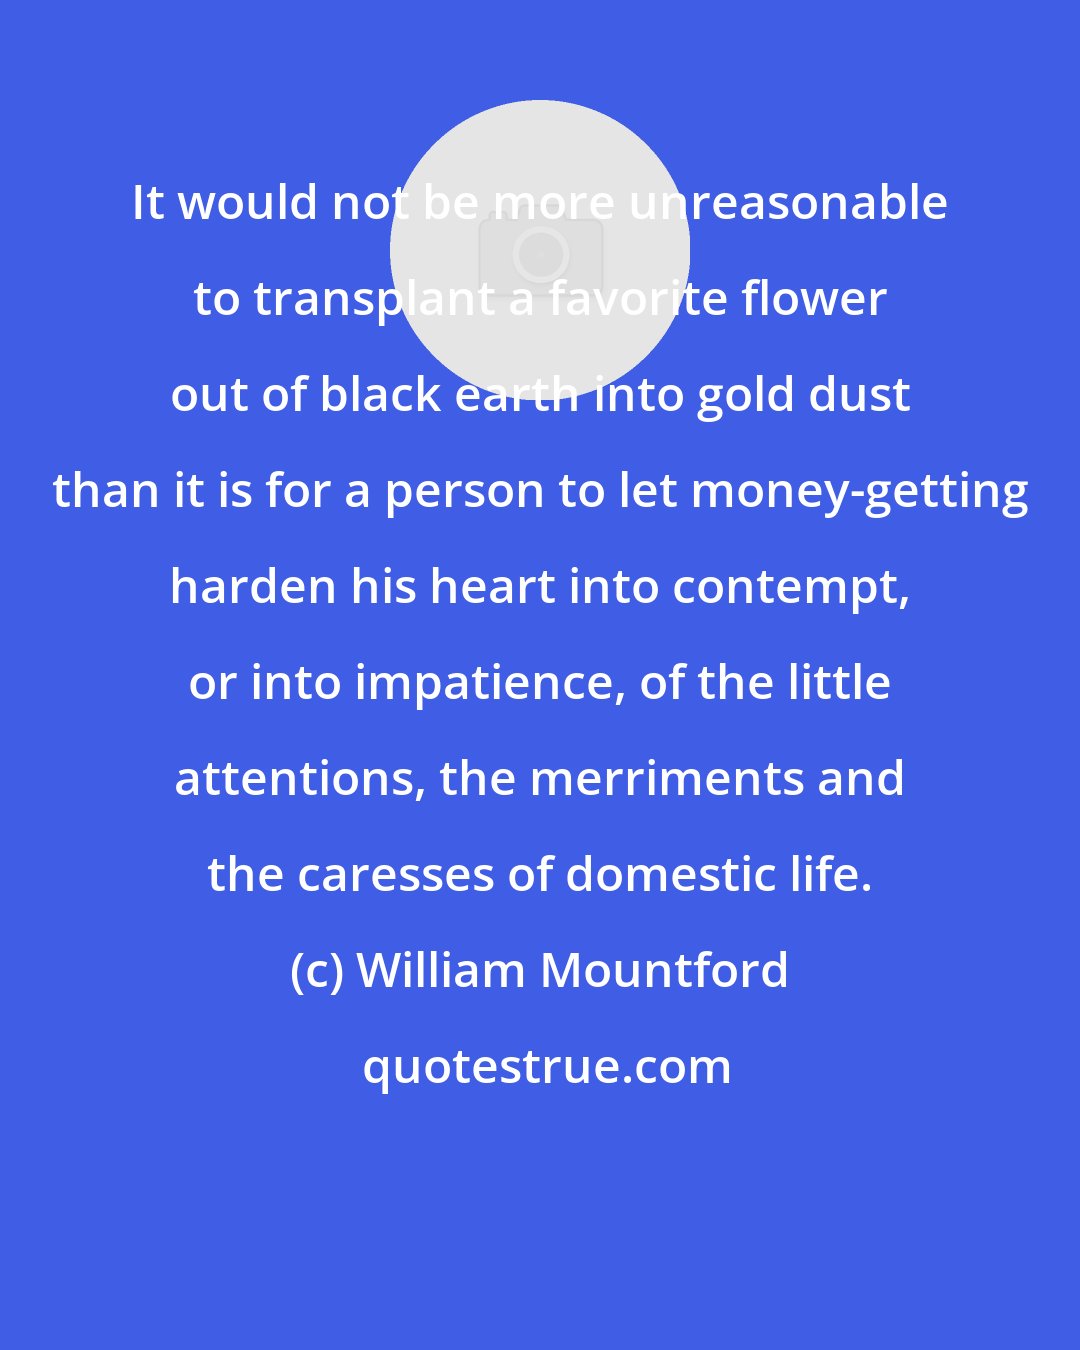 William Mountford: It would not be more unreasonable to transplant a favorite flower out of black earth into gold dust than it is for a person to let money-getting harden his heart into contempt, or into impatience, of the little attentions, the merriments and the caresses of domestic life.